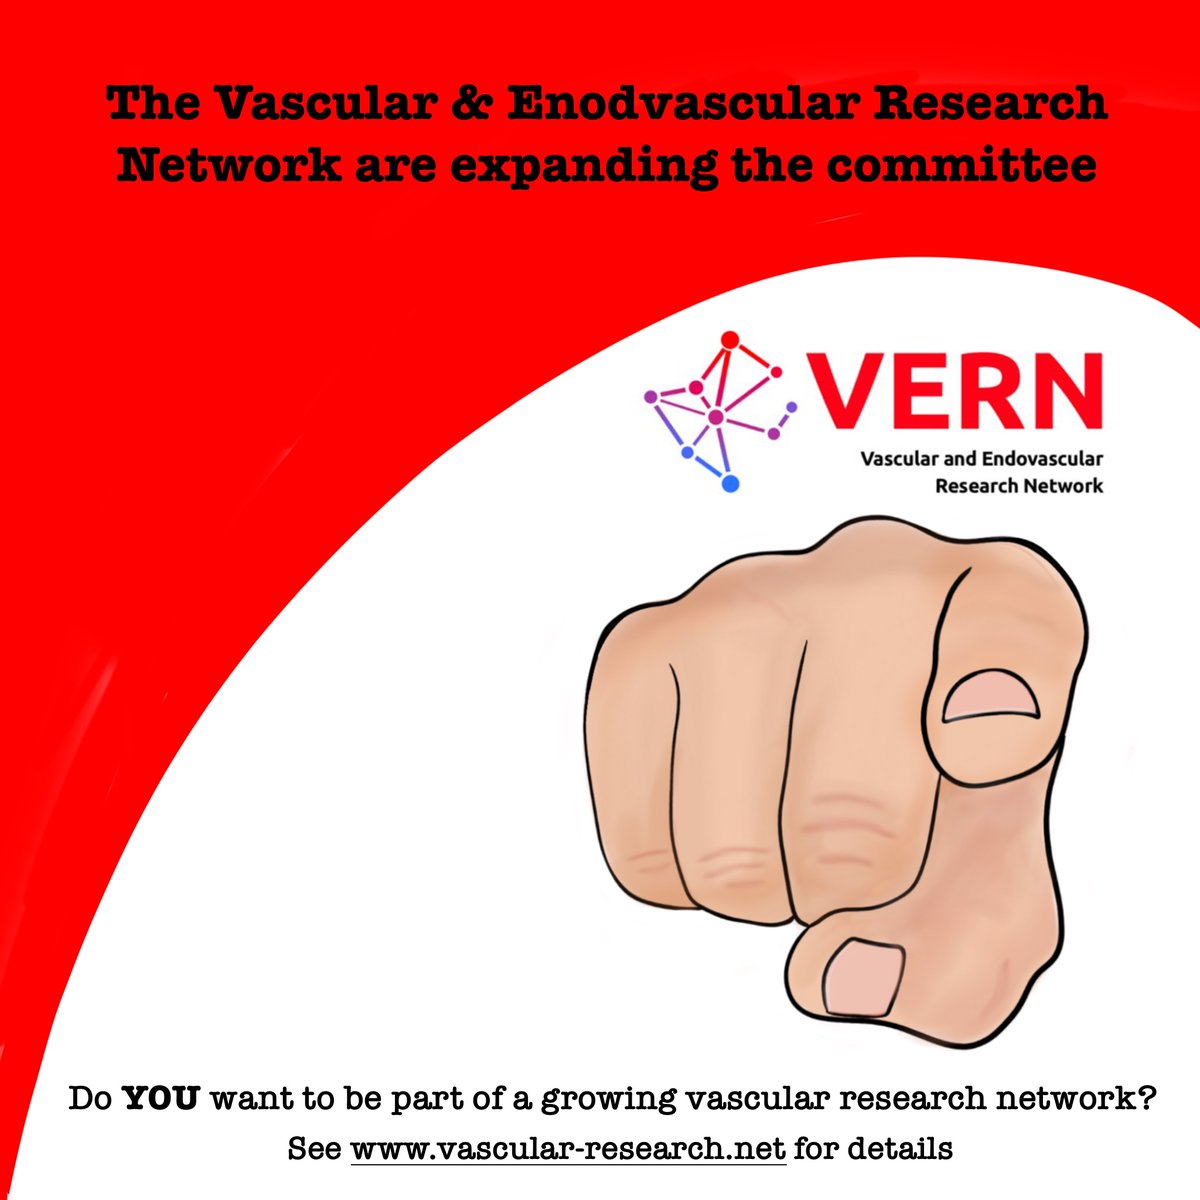 We are excited to announce that we are recruiting for three new committee members🙌 Positions will be available for one publicity lead and two project leads. For more information head to: vascular-research.net/recruitment/